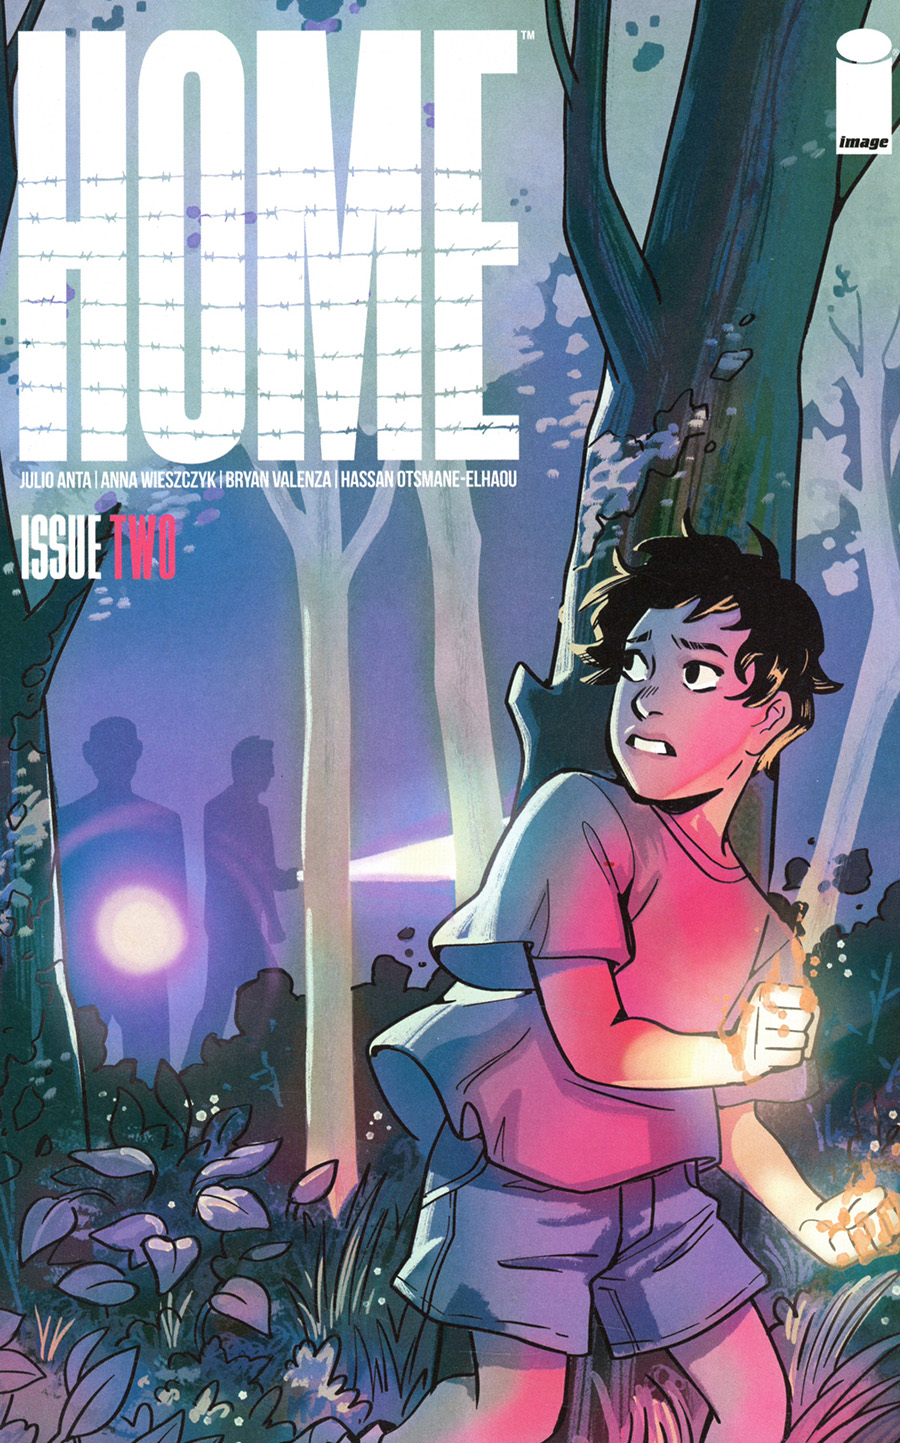 Home (Image Comics) #2 Cover A Regular Lisa Sterle Cover